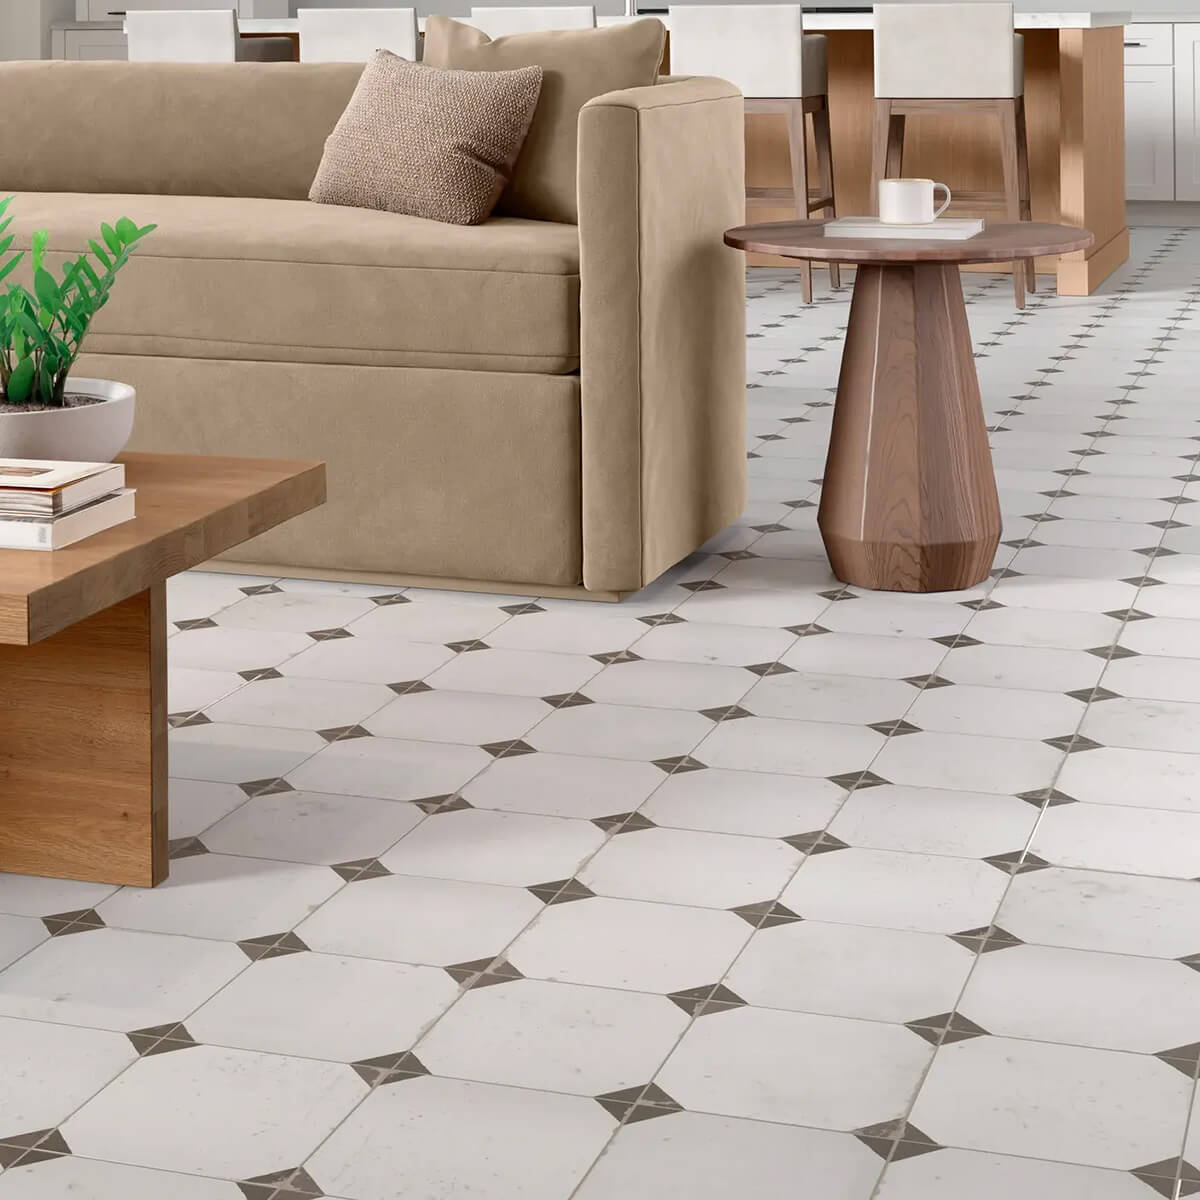 Tile flooring for living area | Rugs Rolls and More